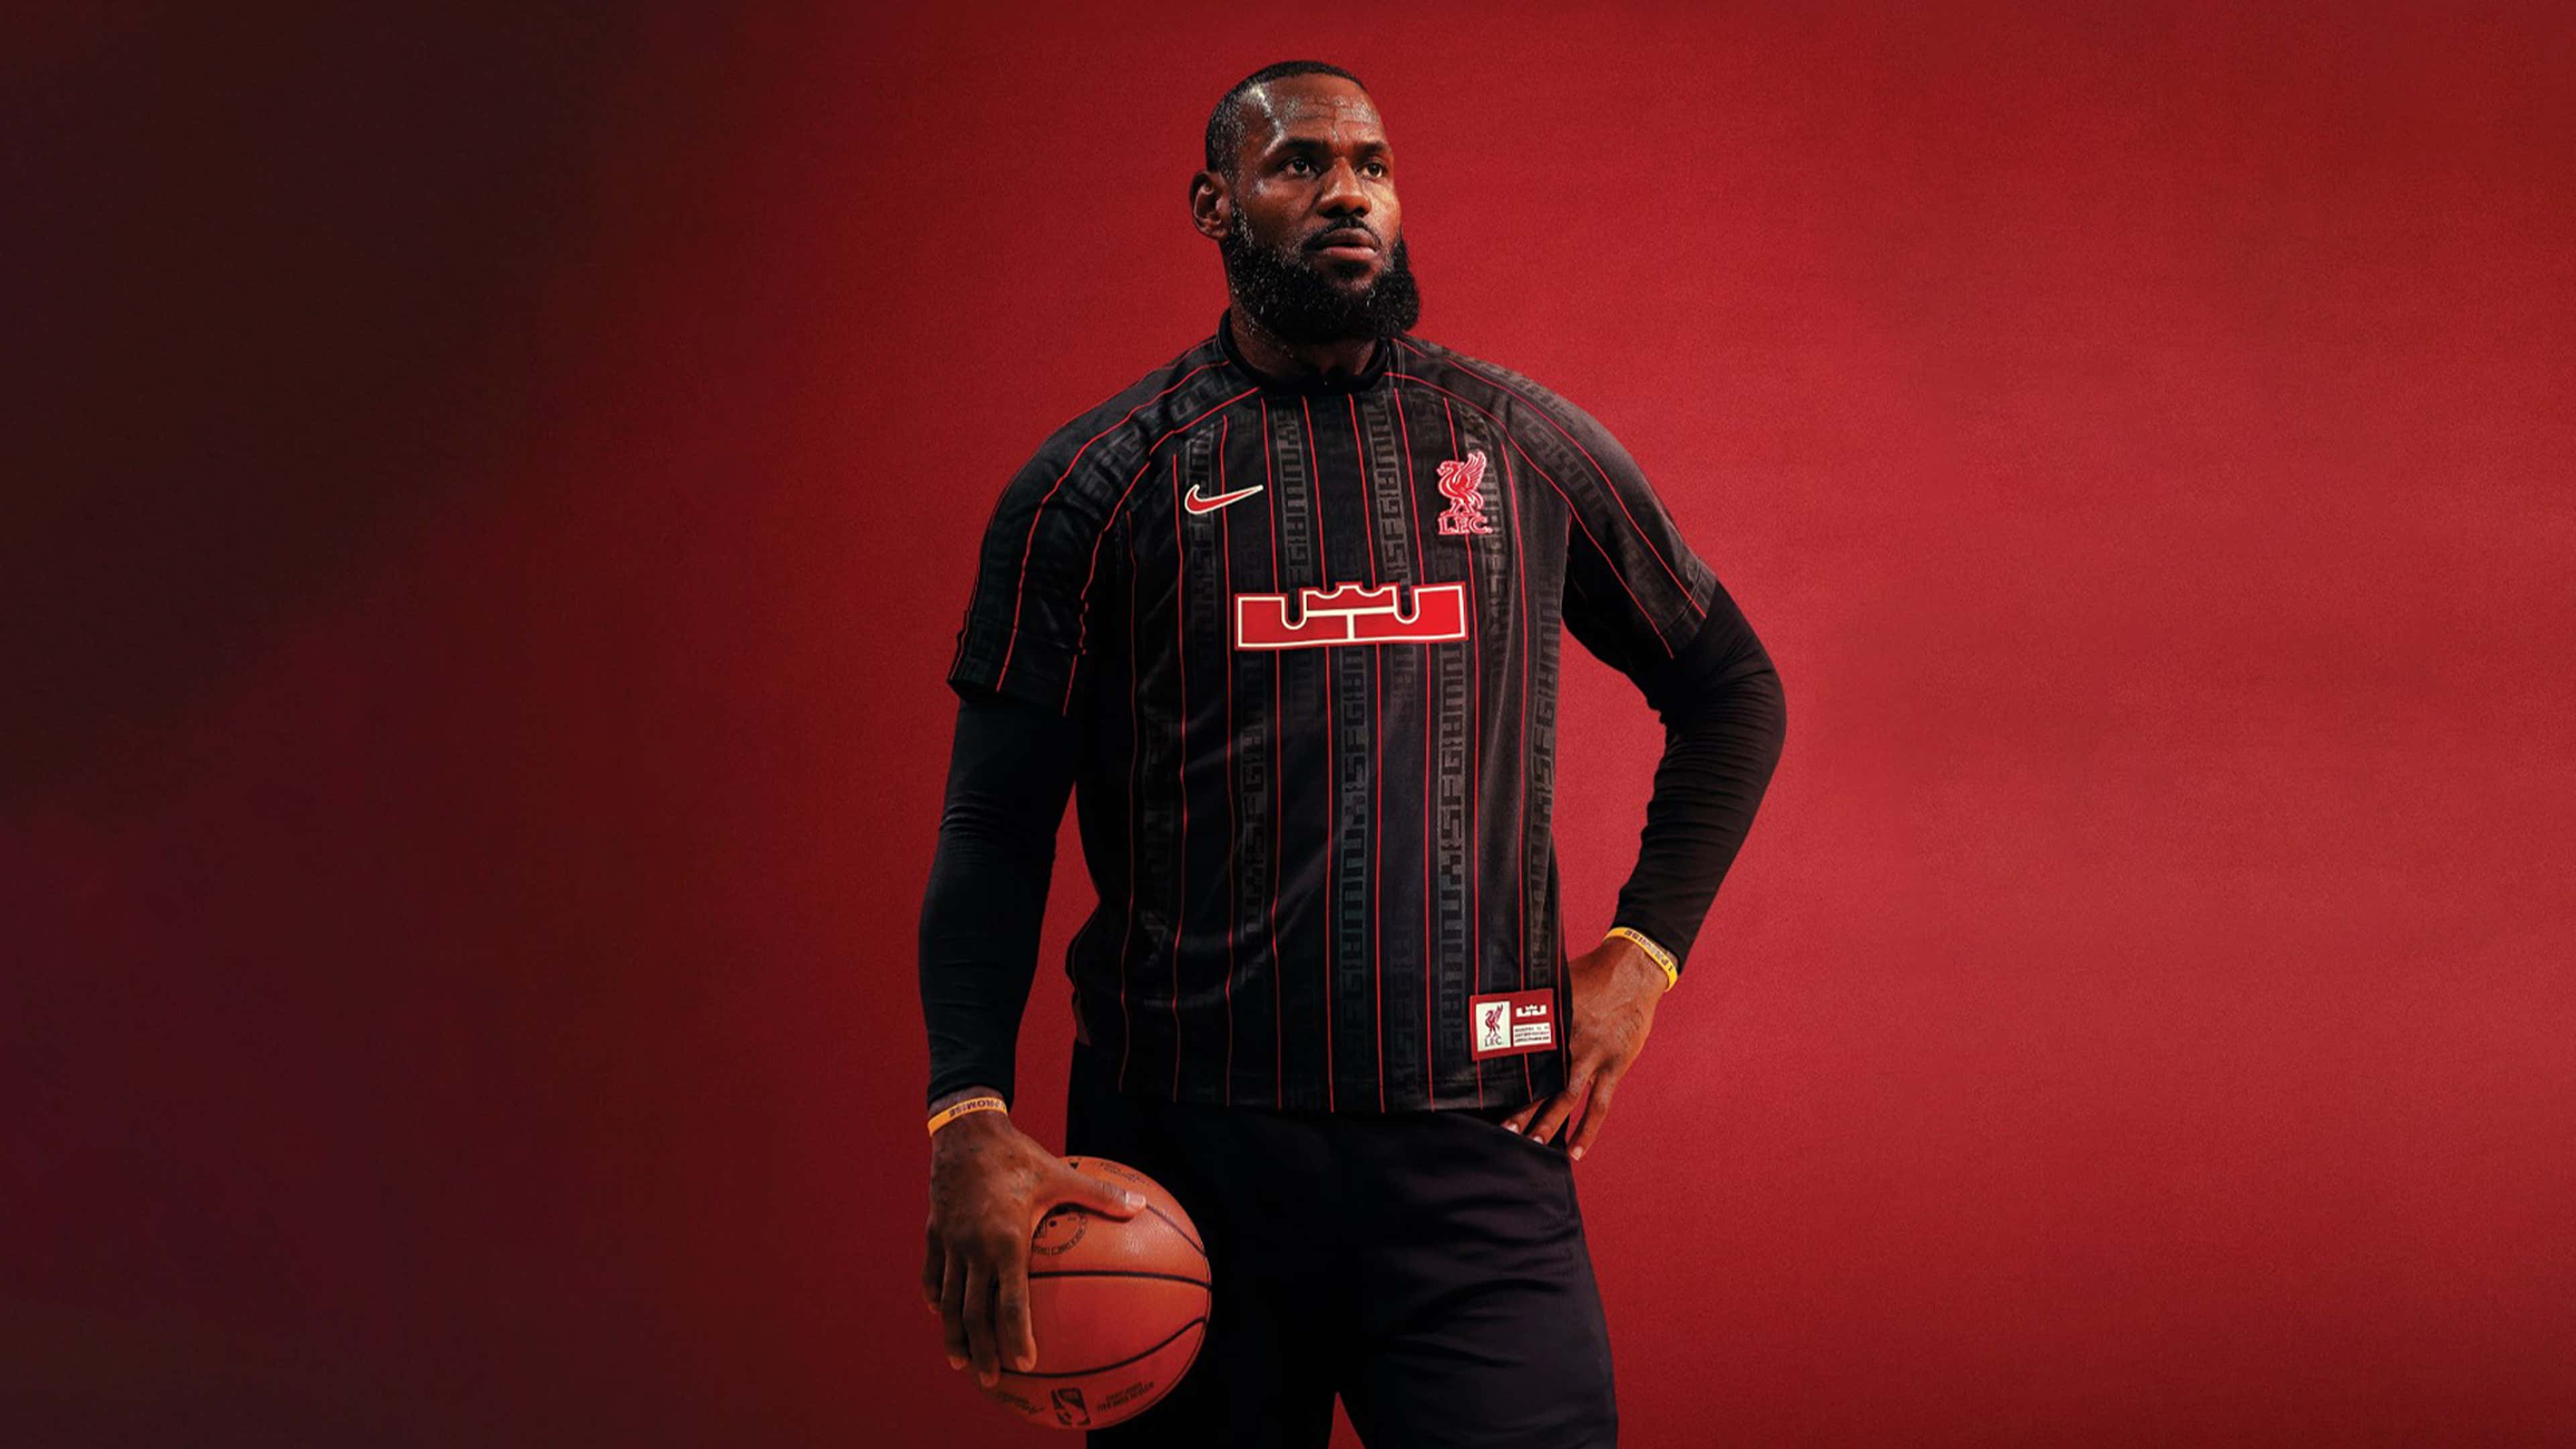 LeBron James complaints could cause NBA to ditch sleeved jerseys